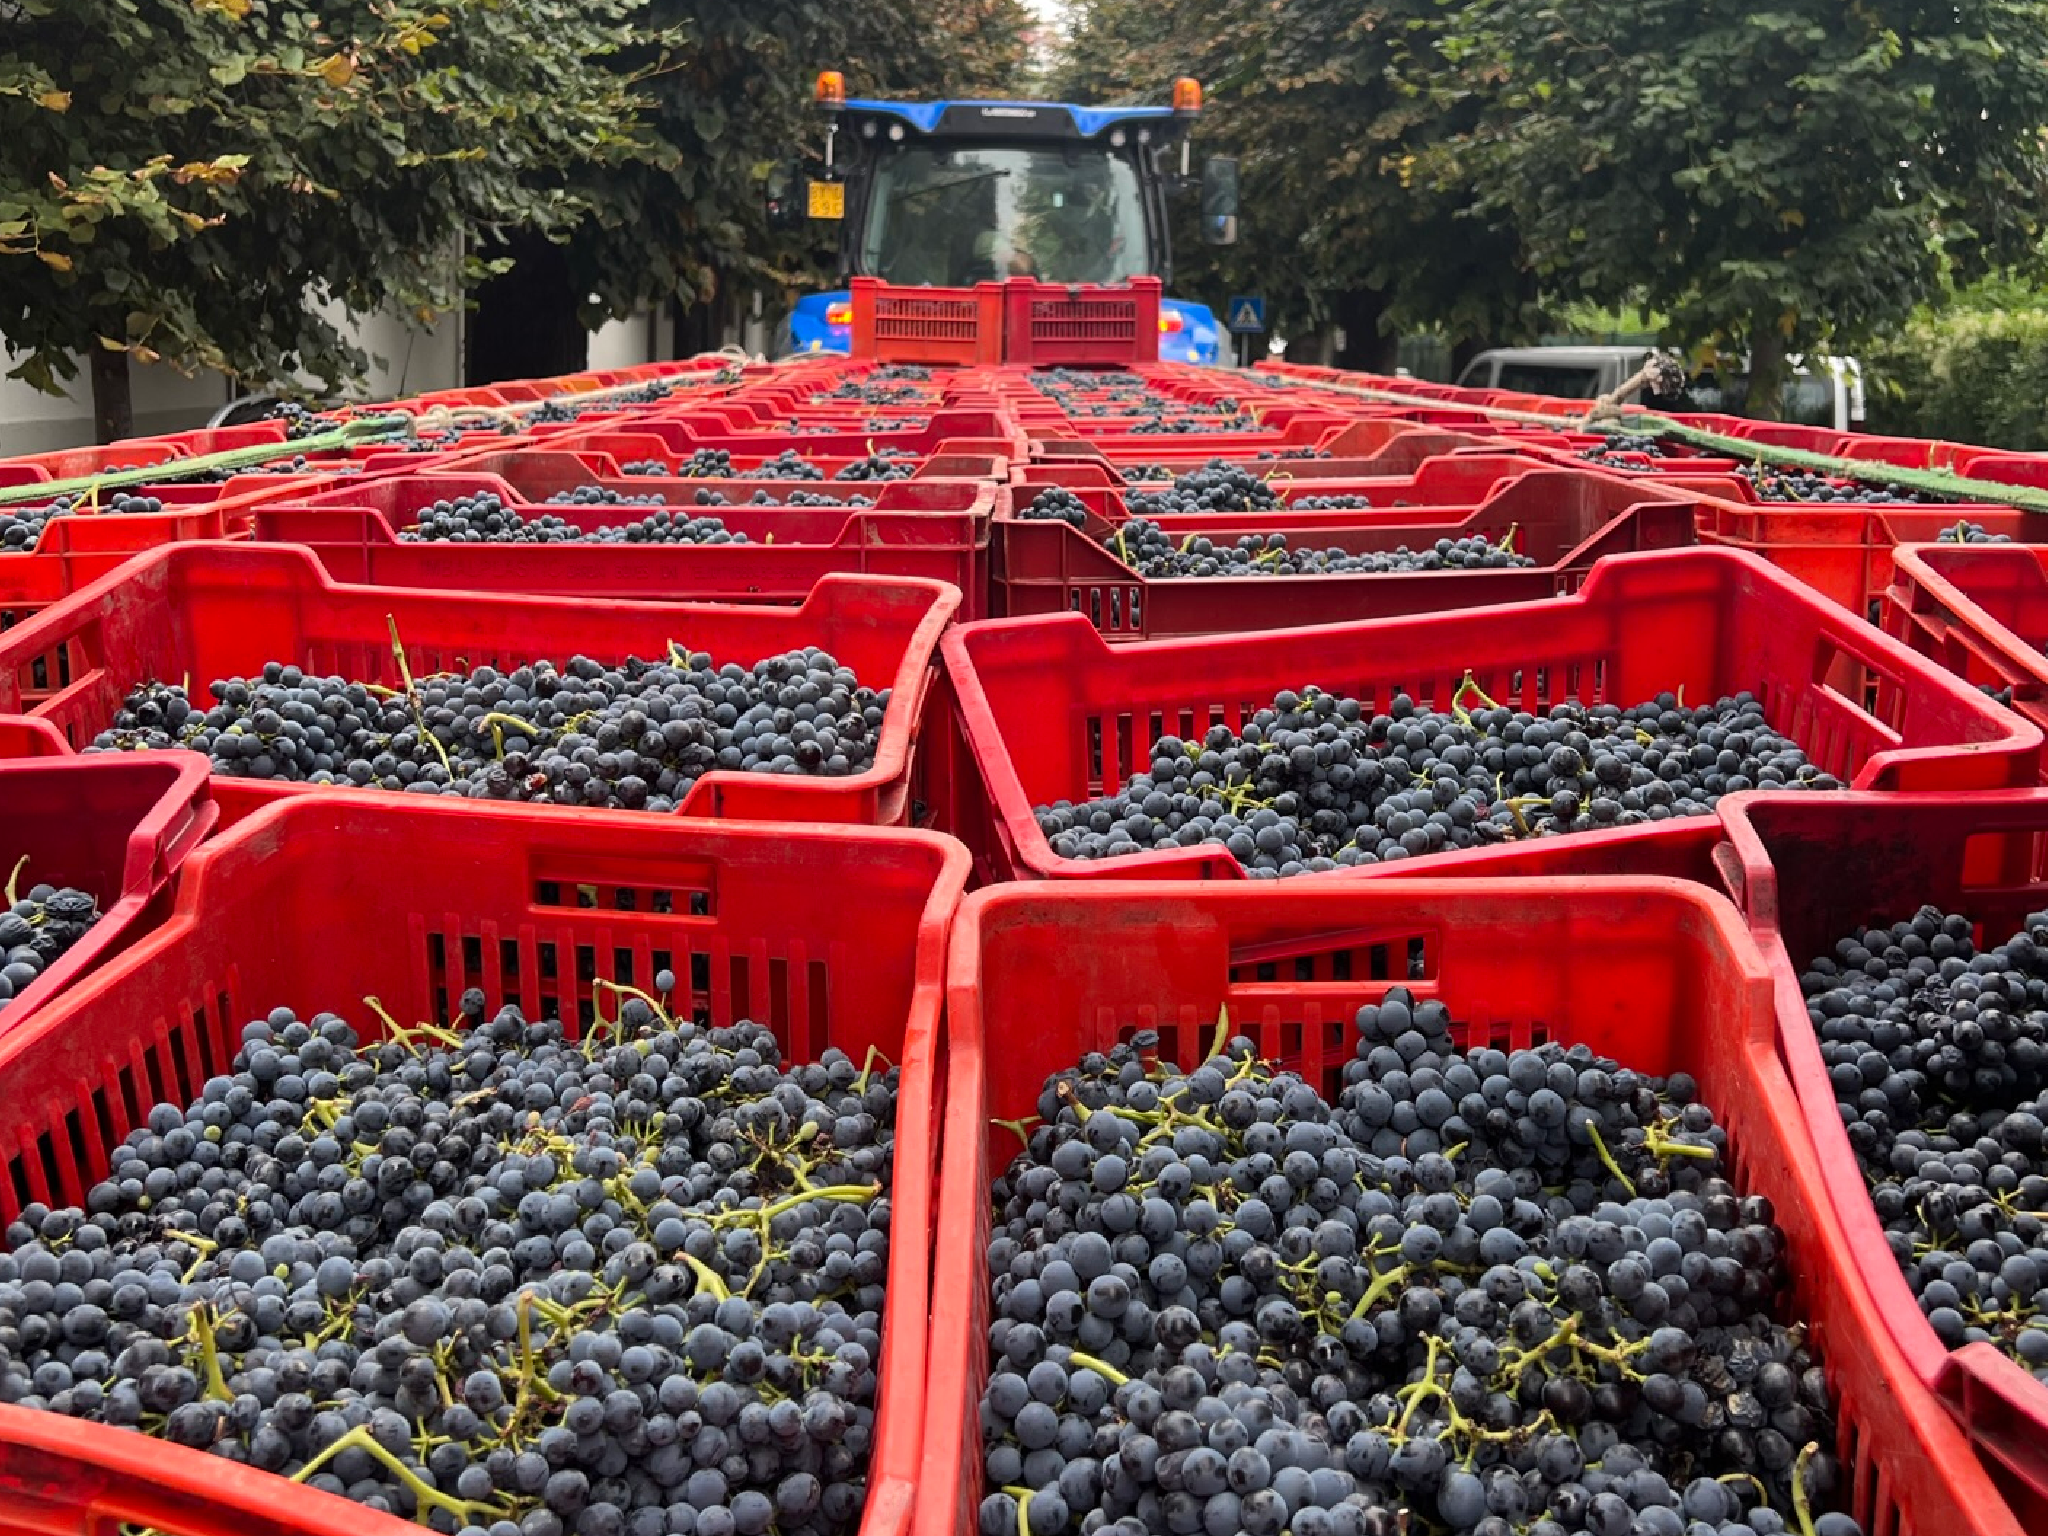 Tractors piled high with grapes are a common sight in autumn